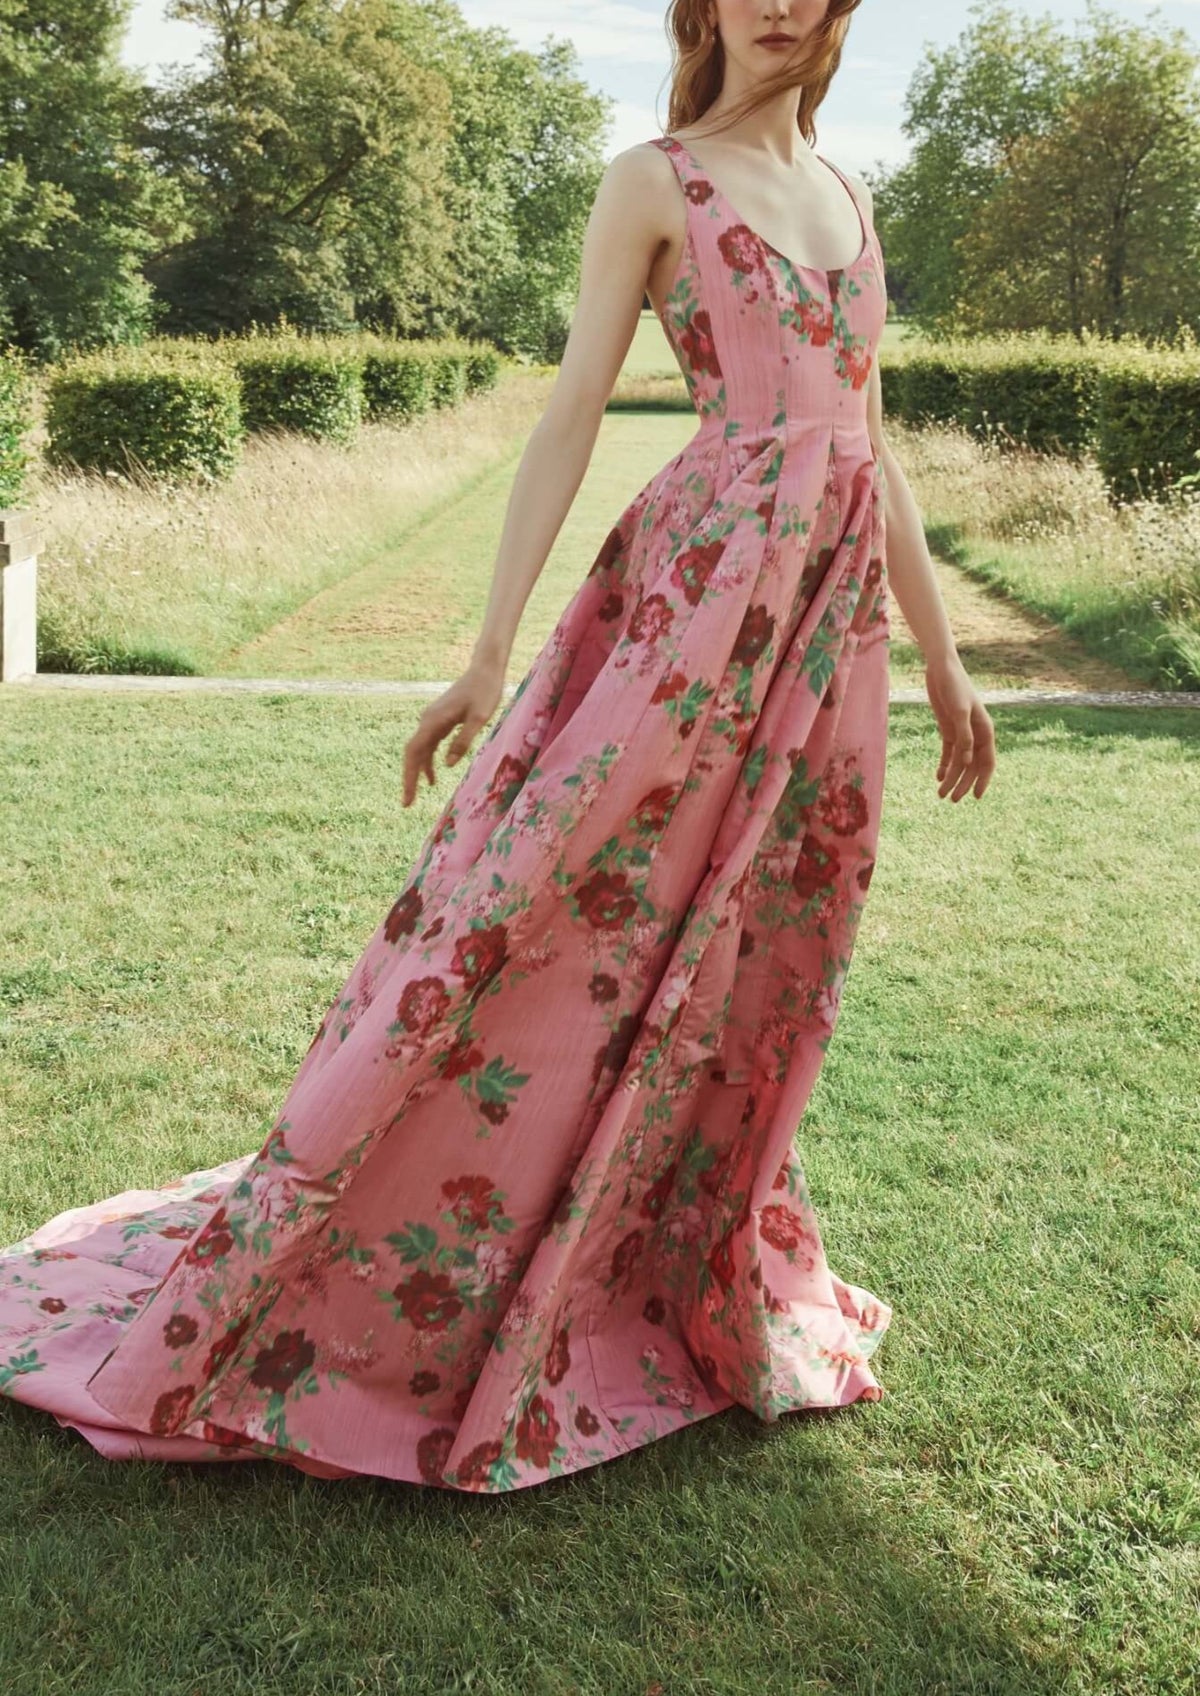 Botticelli Pink Floral Gown